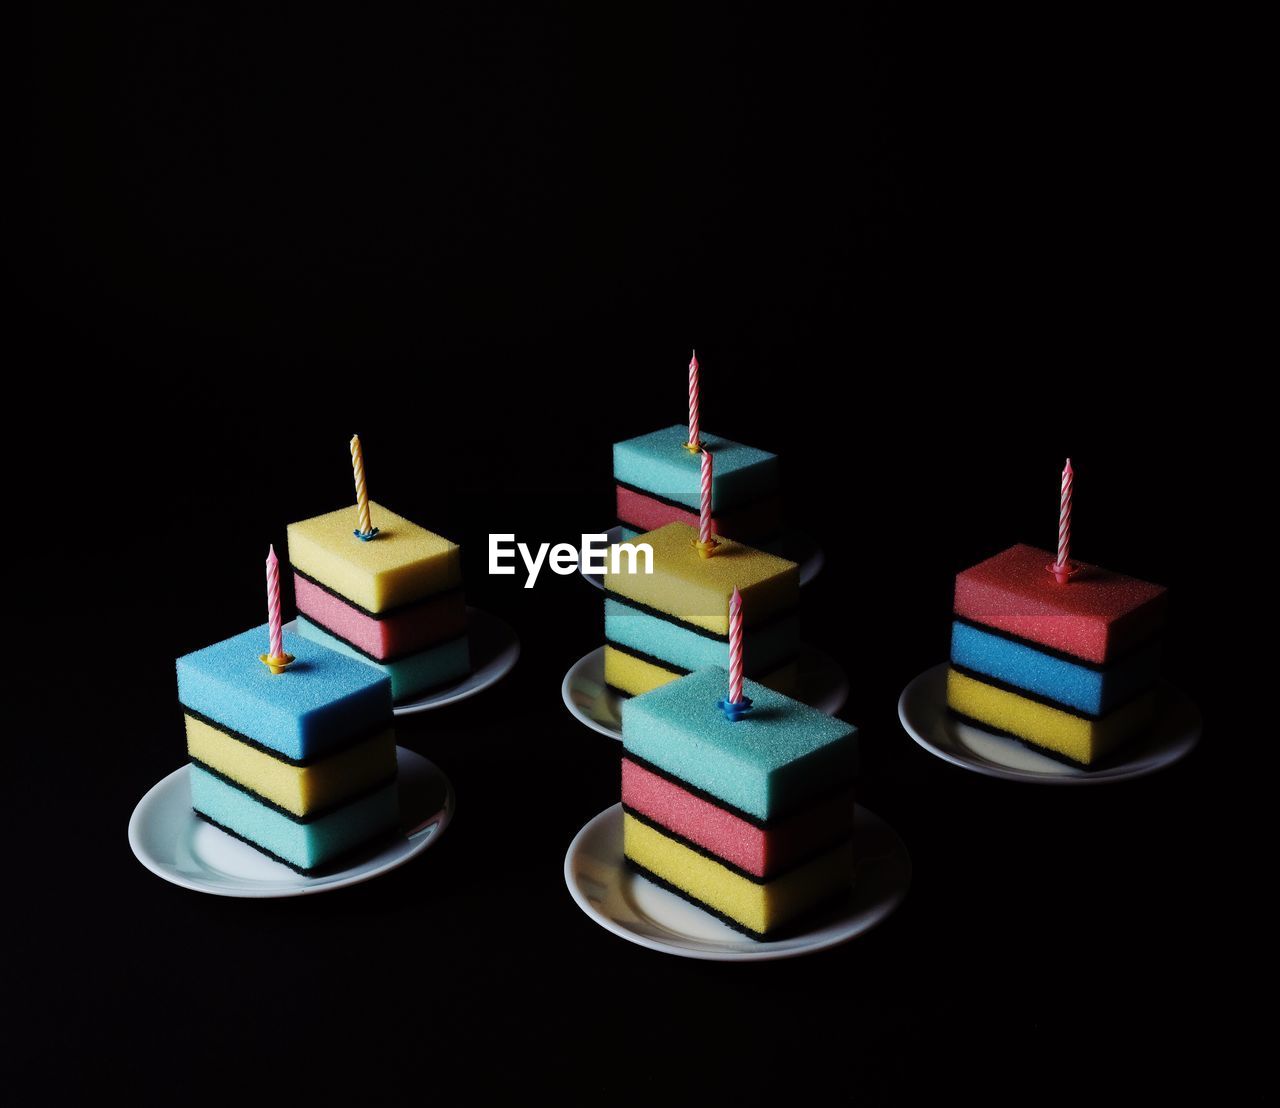 Close-up of candles over multi colored sponge stacked in plate against black background